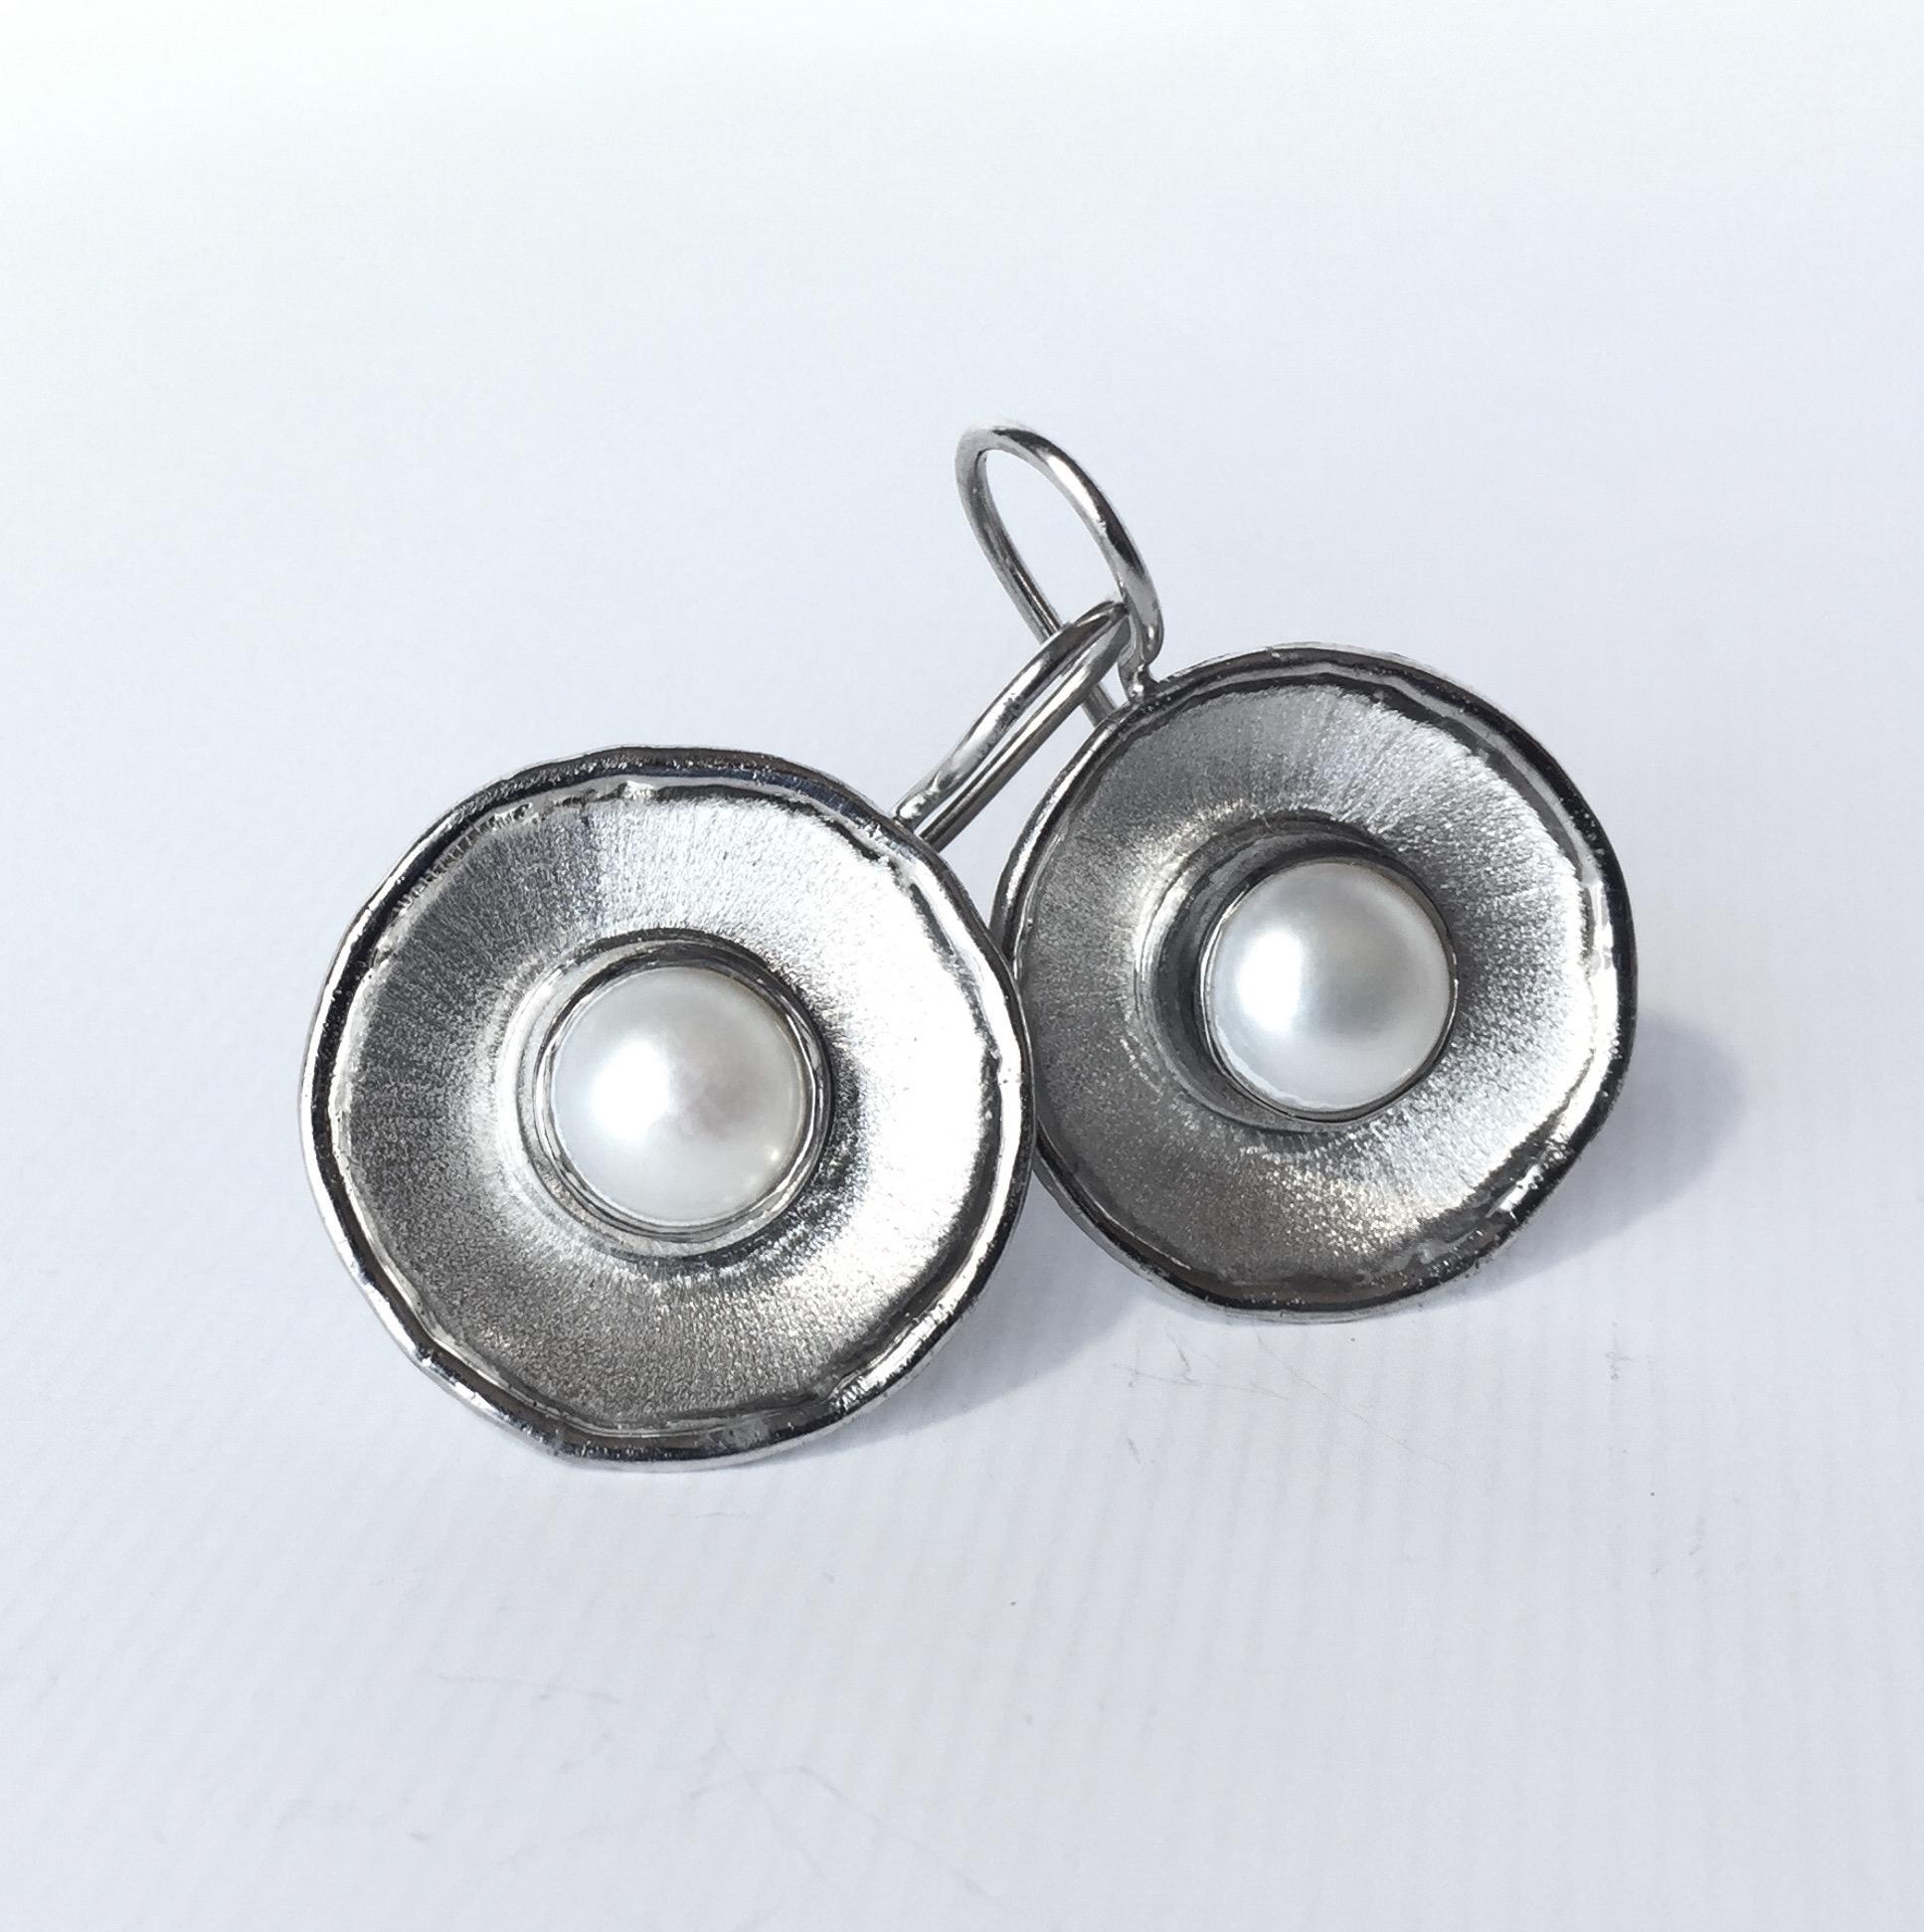 From Yianni Creations Ammos Collection, these are handmade artisan earrings from a fine silver plated with palladium to resist against elements. Each earring feature a 7mm round freshwater pearl. These round dangle earrings combine contrast of mat